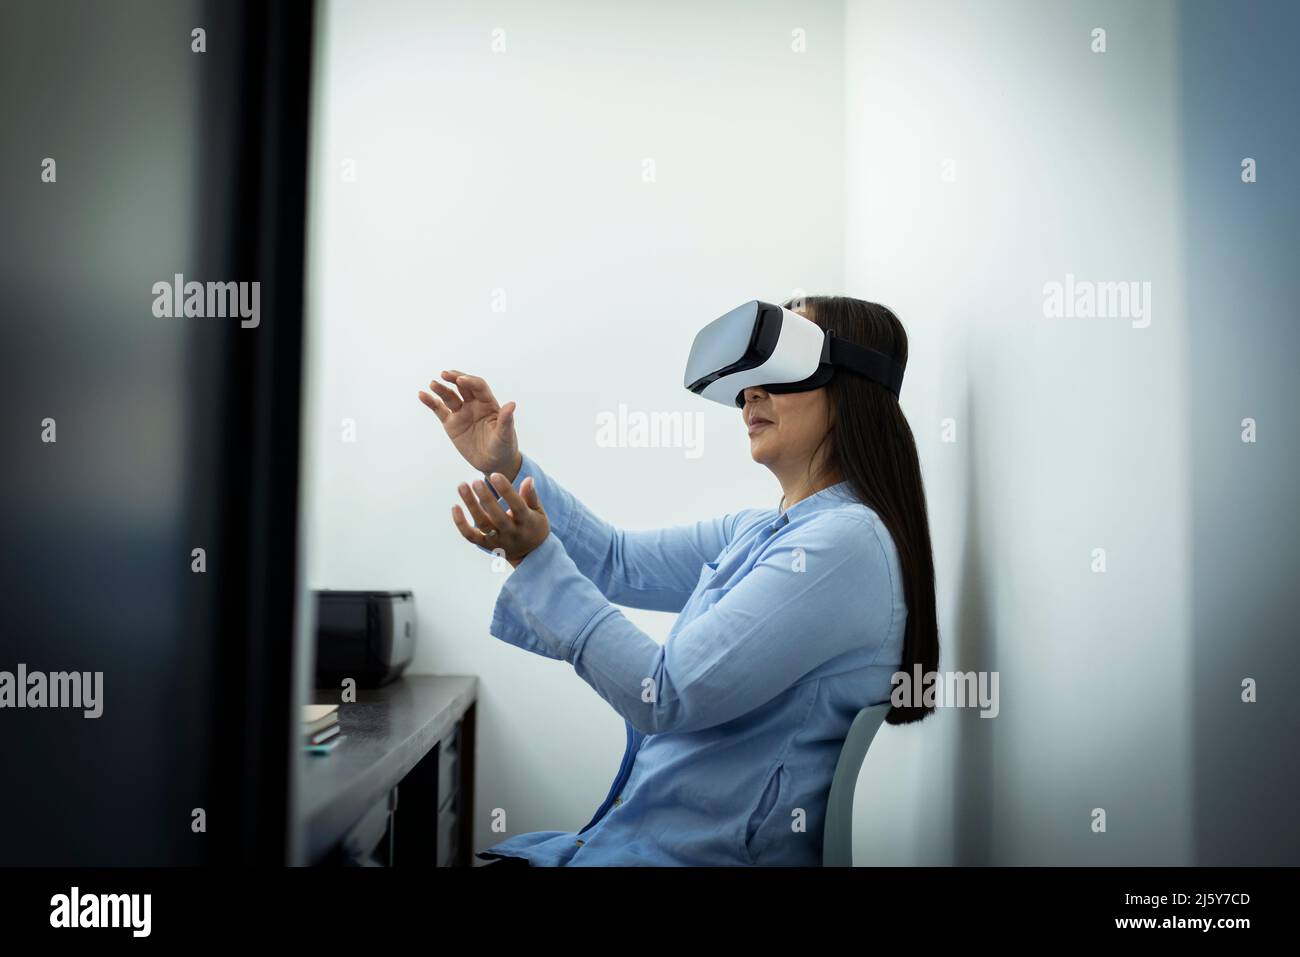 Businesswoman using VR headset in office Stock Photo